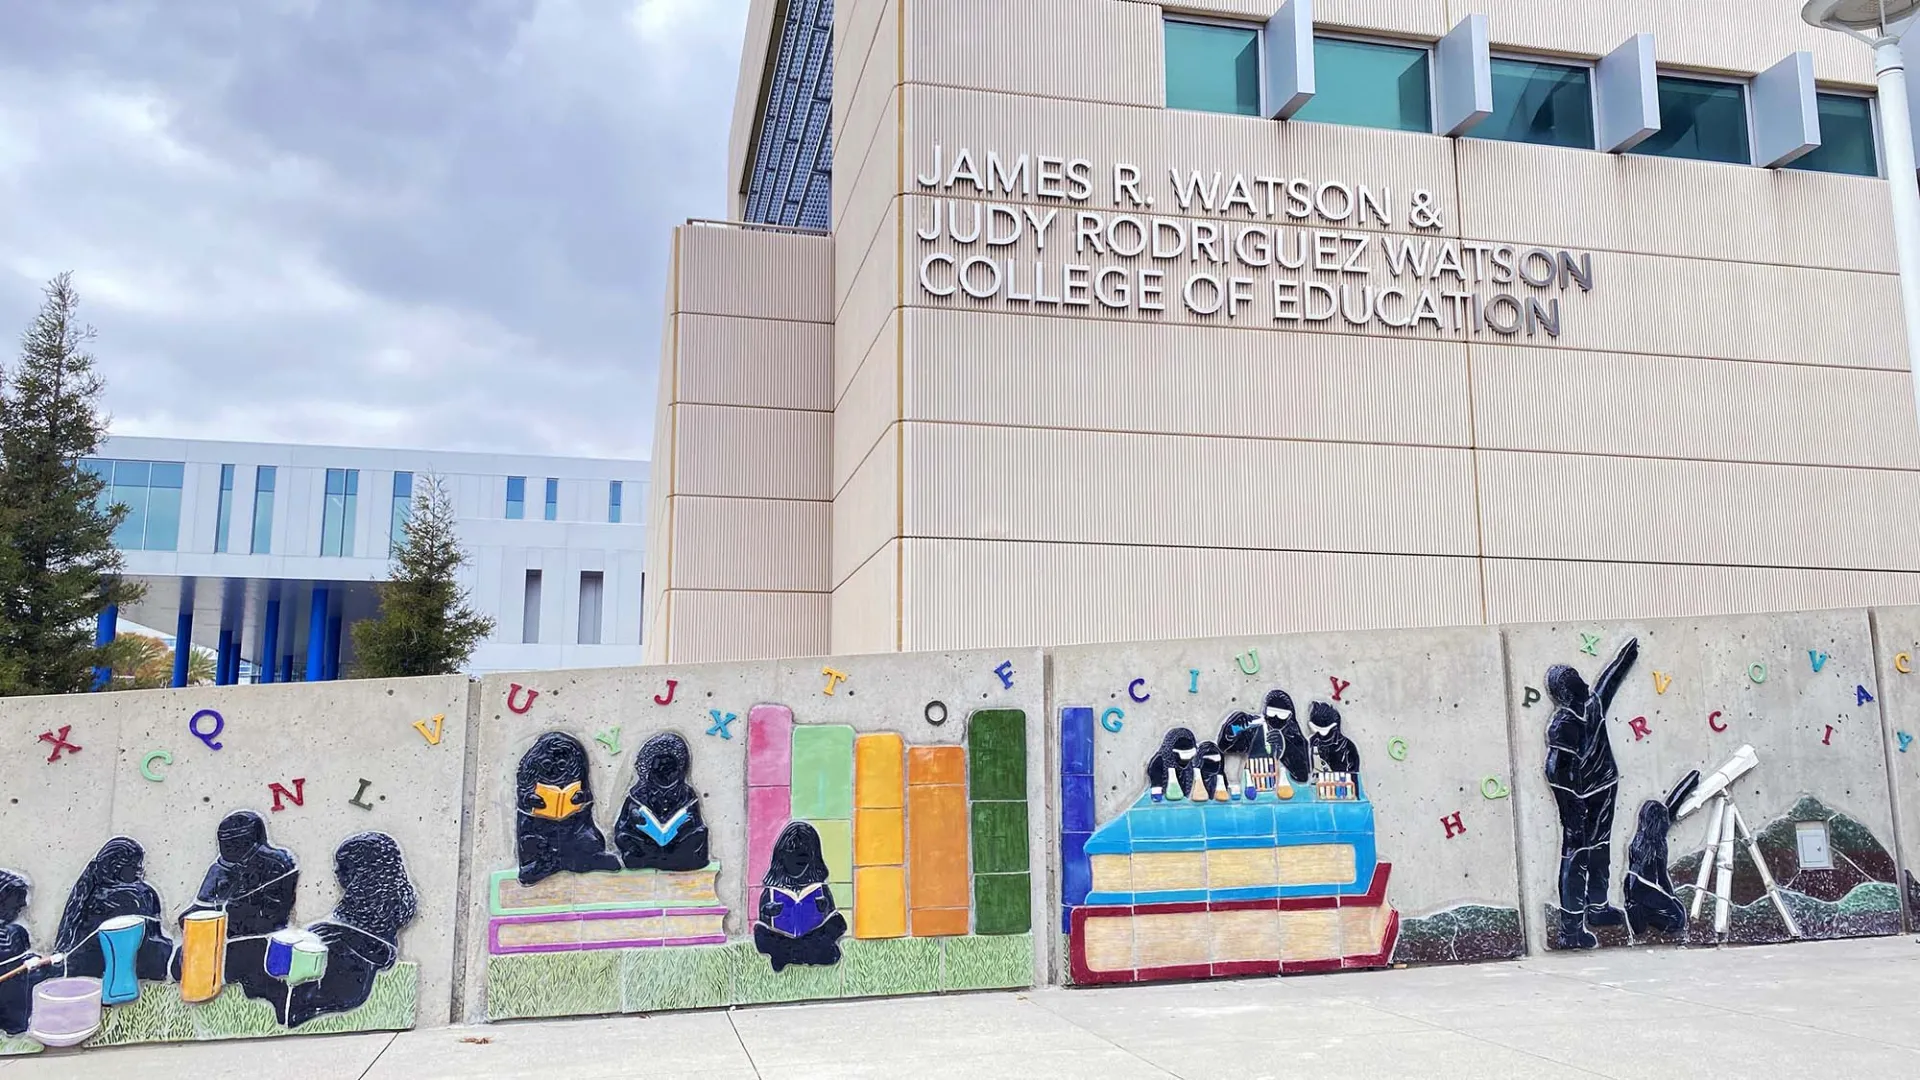 Part of the mural “Eternal Learning” in front of the James R. Watson and Judy Rodriguez Watson College of Education.